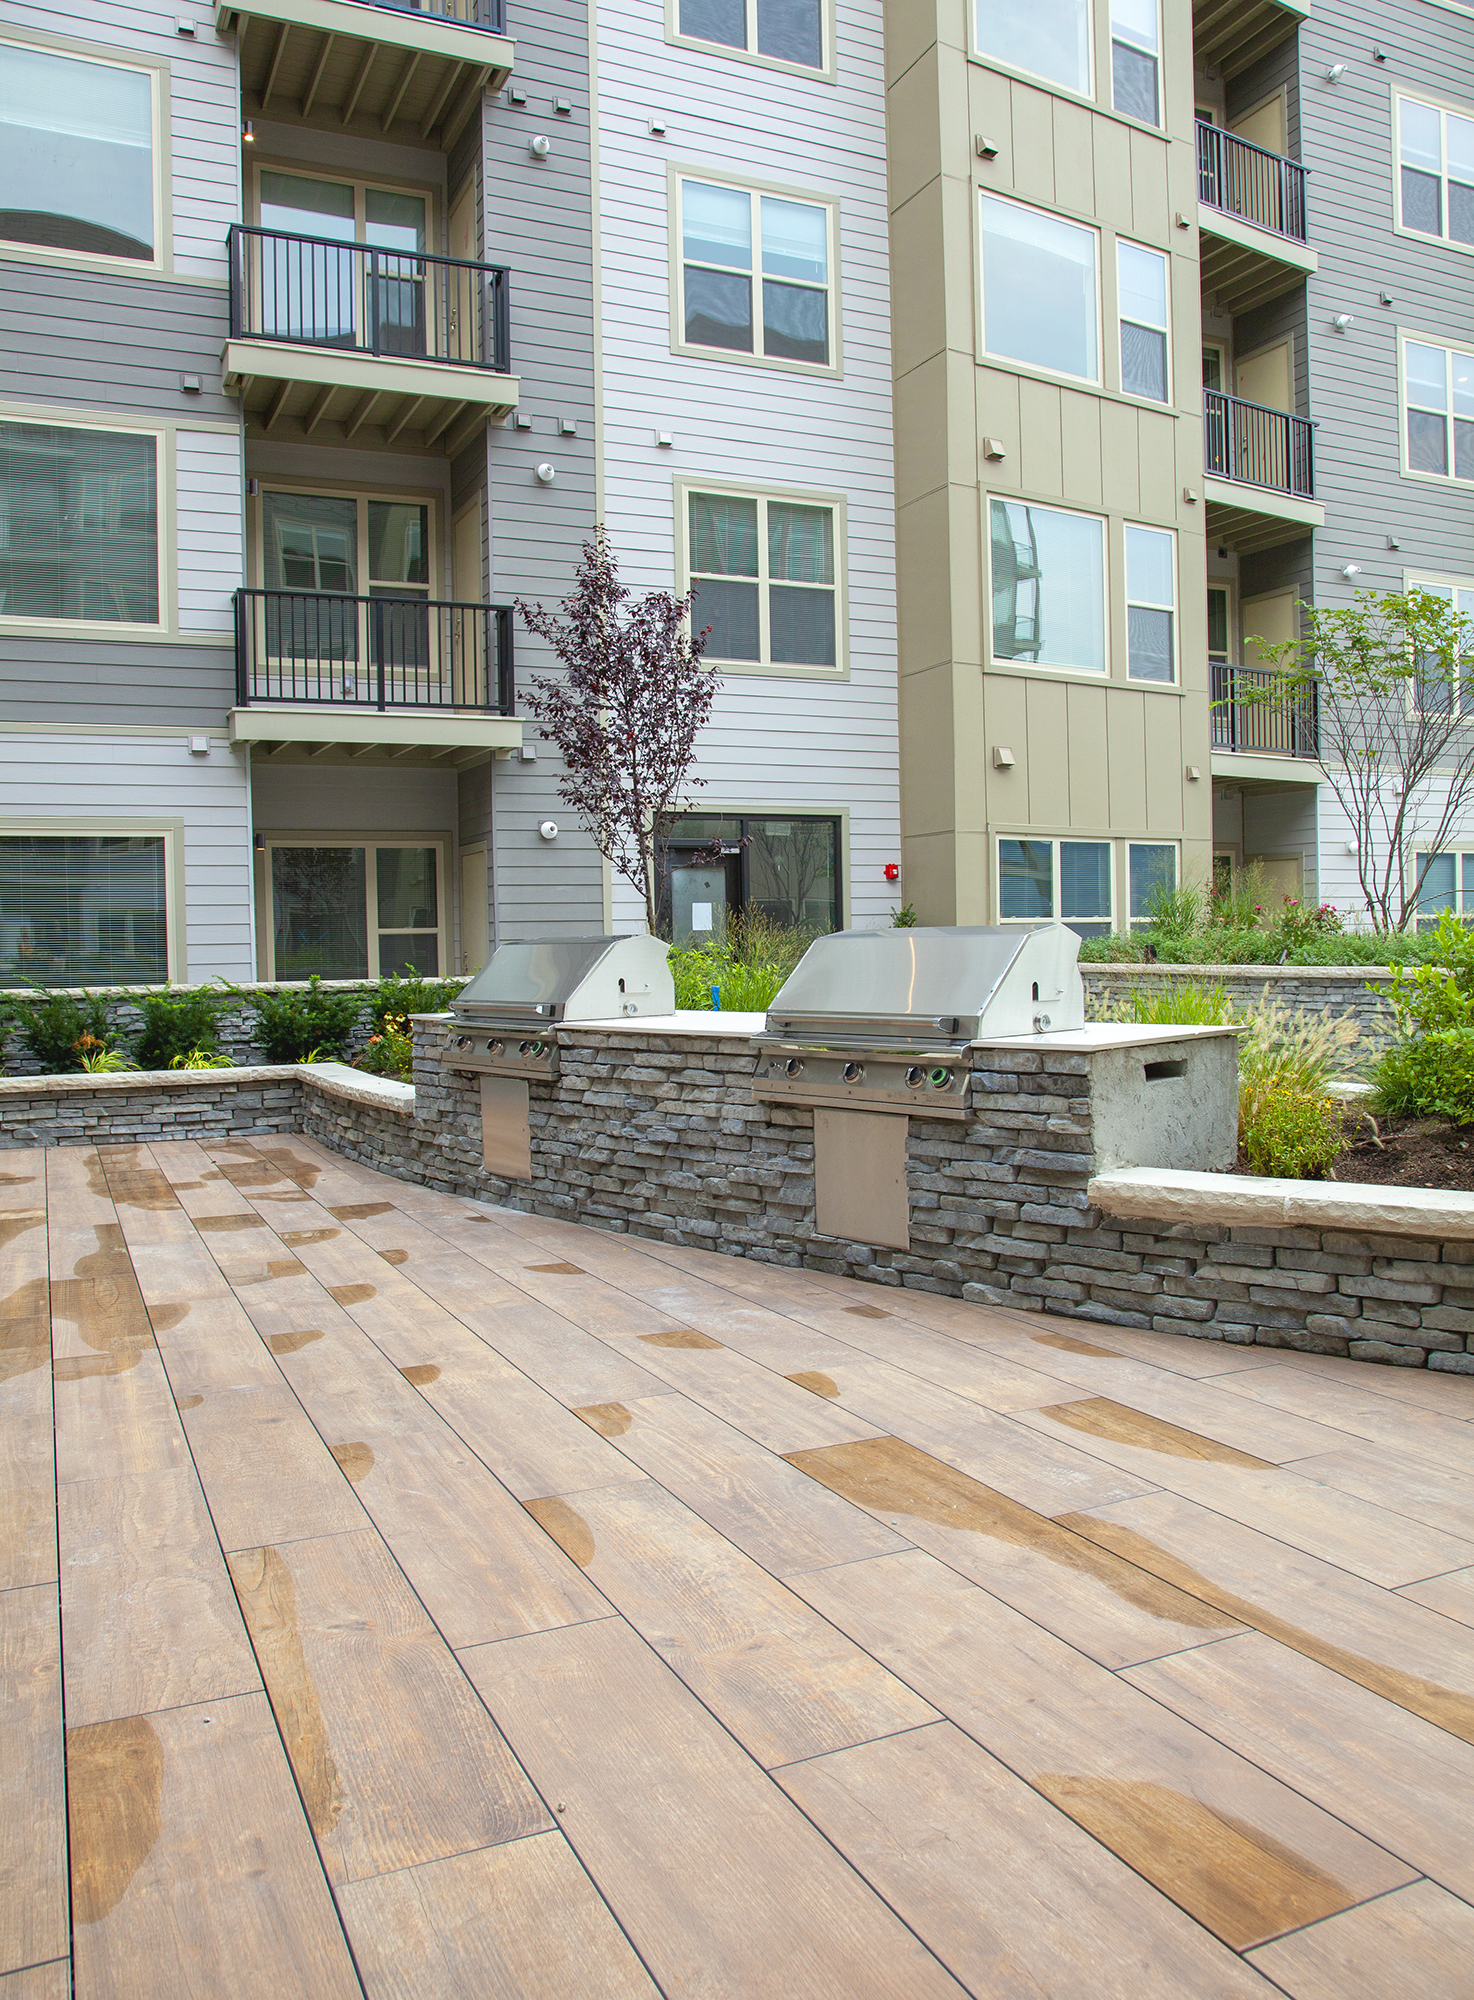 The top floors of Avalon Yonkers condominiums overlook a roof deck with Rivercrest wall garden beds and grilling stations on wooden planks.